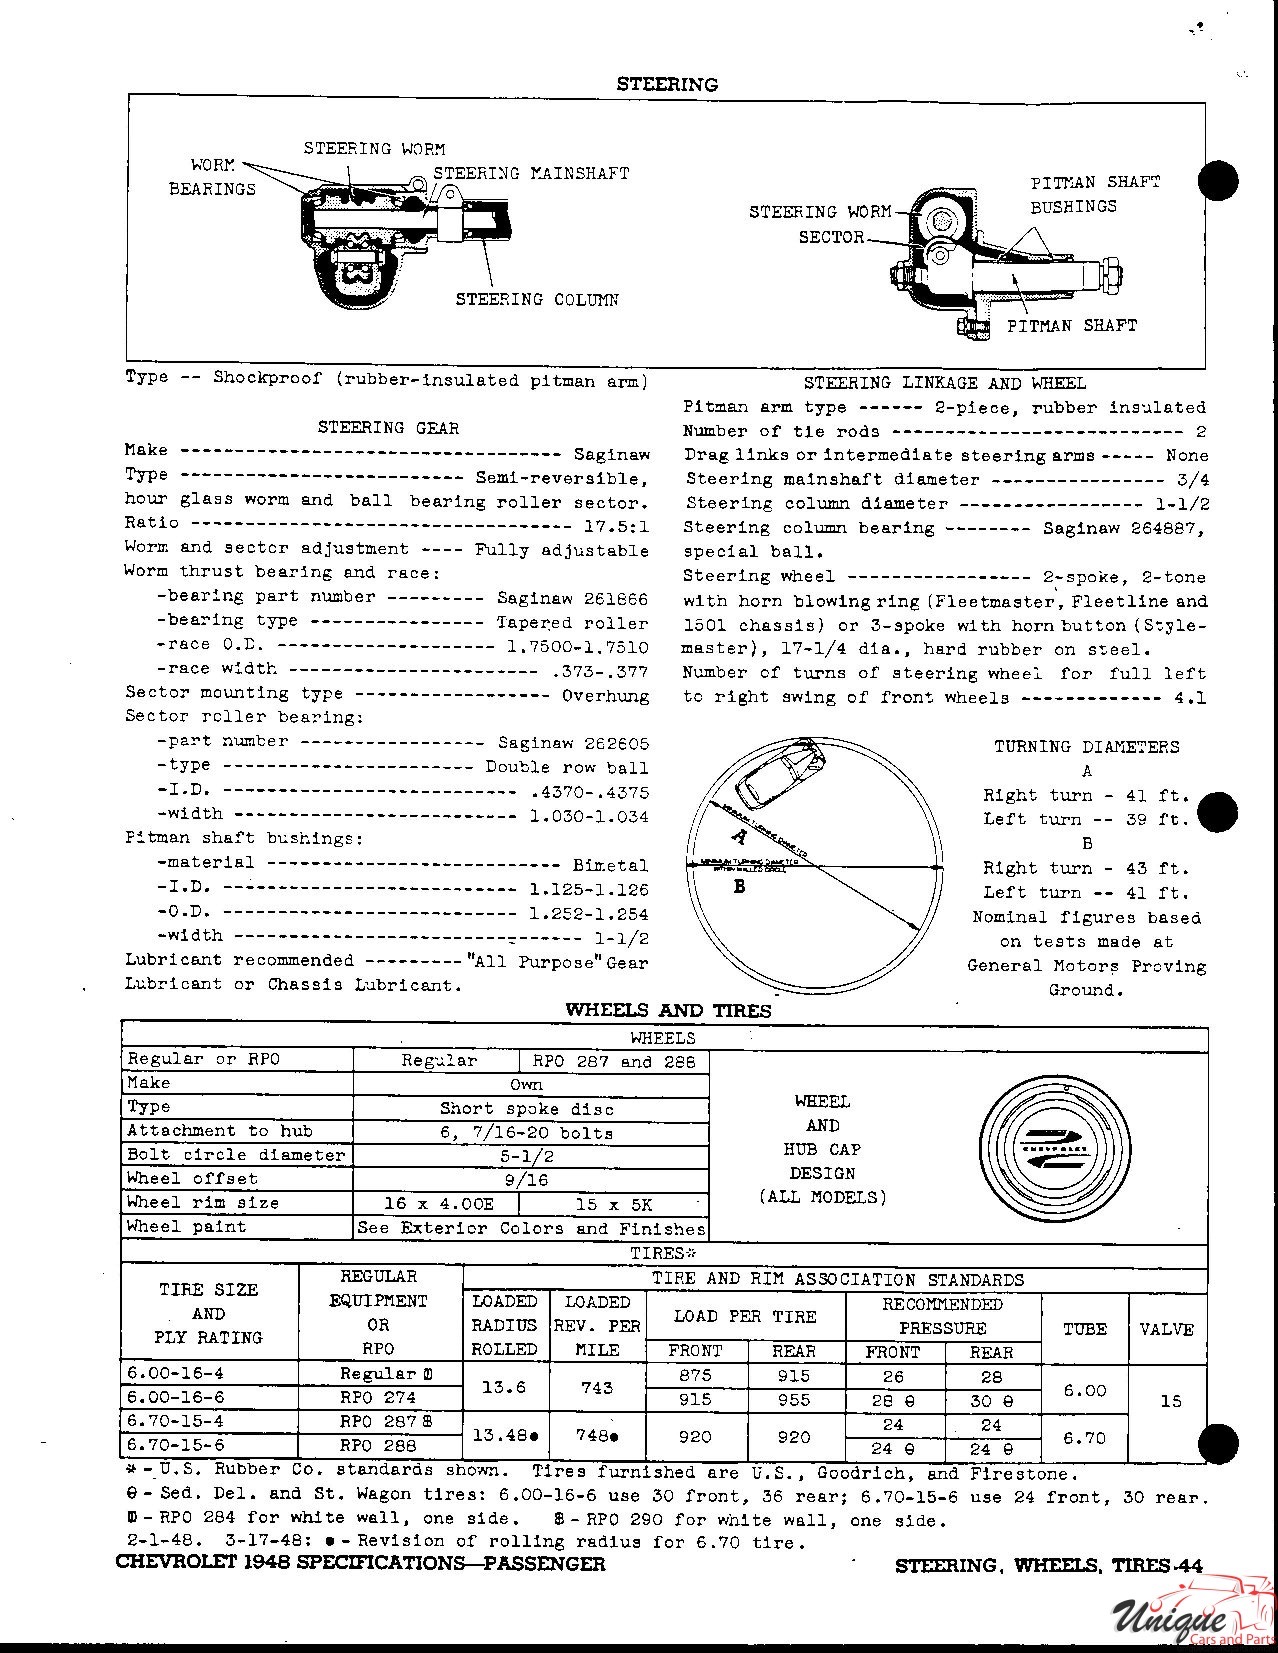 1948 Chevrolet Specifications Page 39